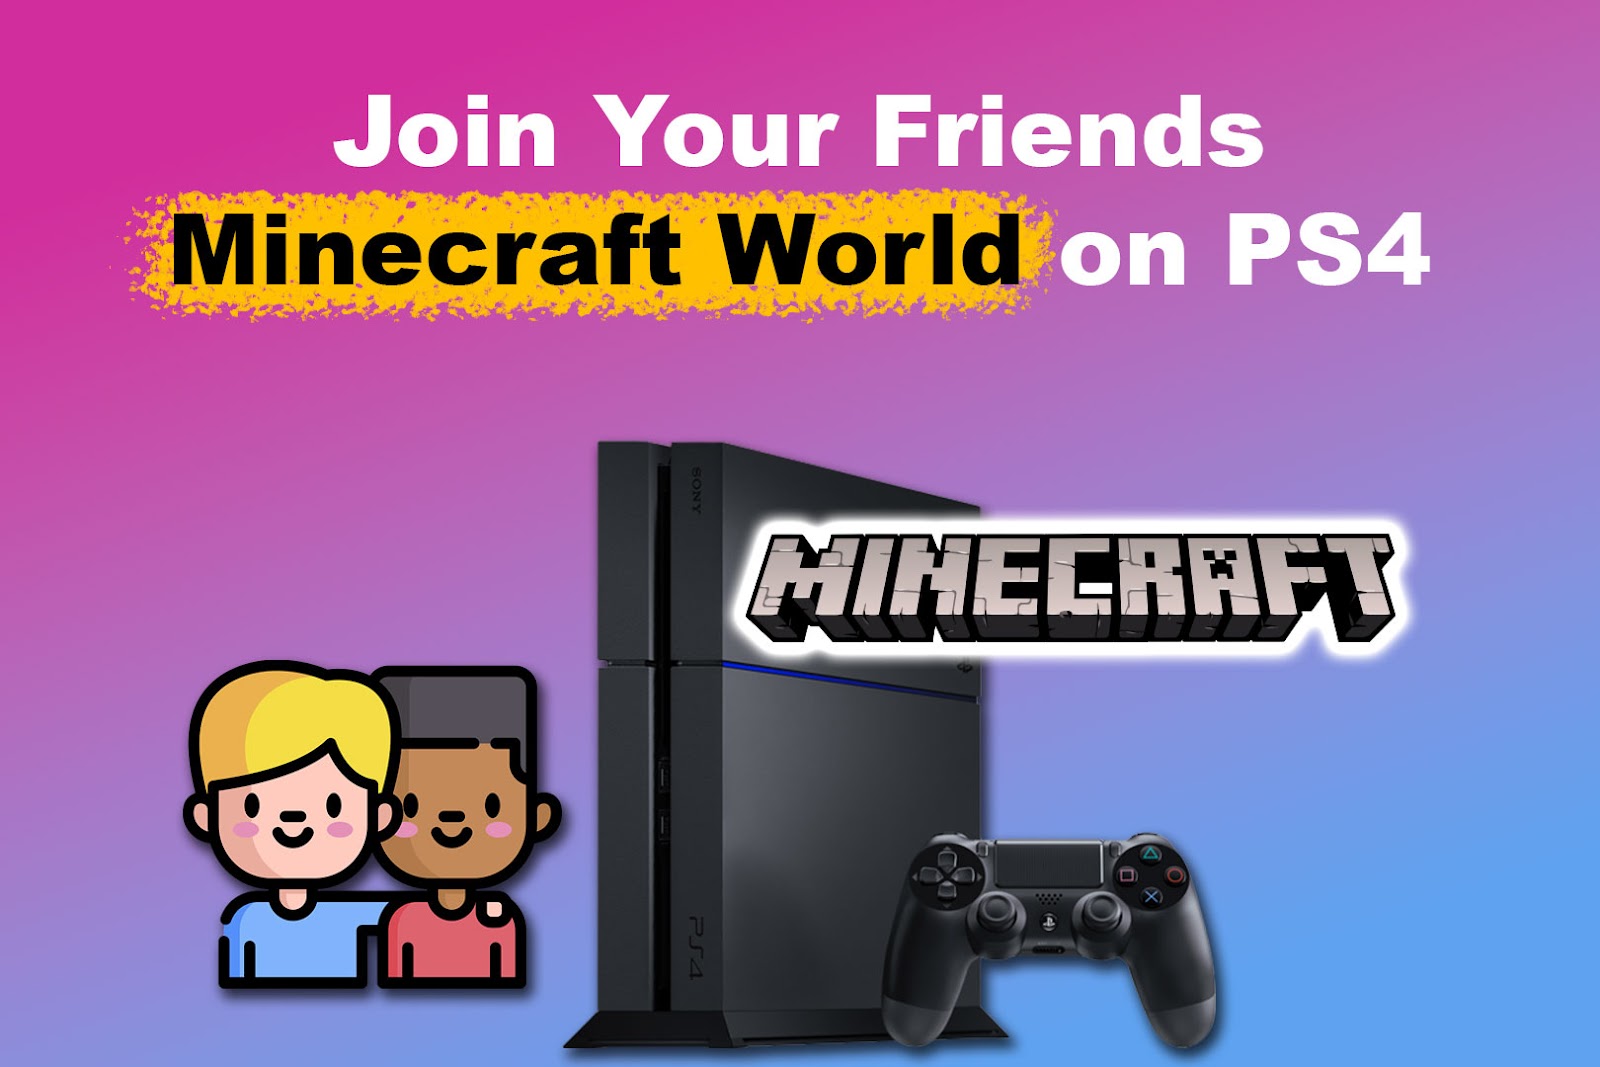 Can’t Join Your Friends’ Minecraft World on PS4? Here’s the Fix!